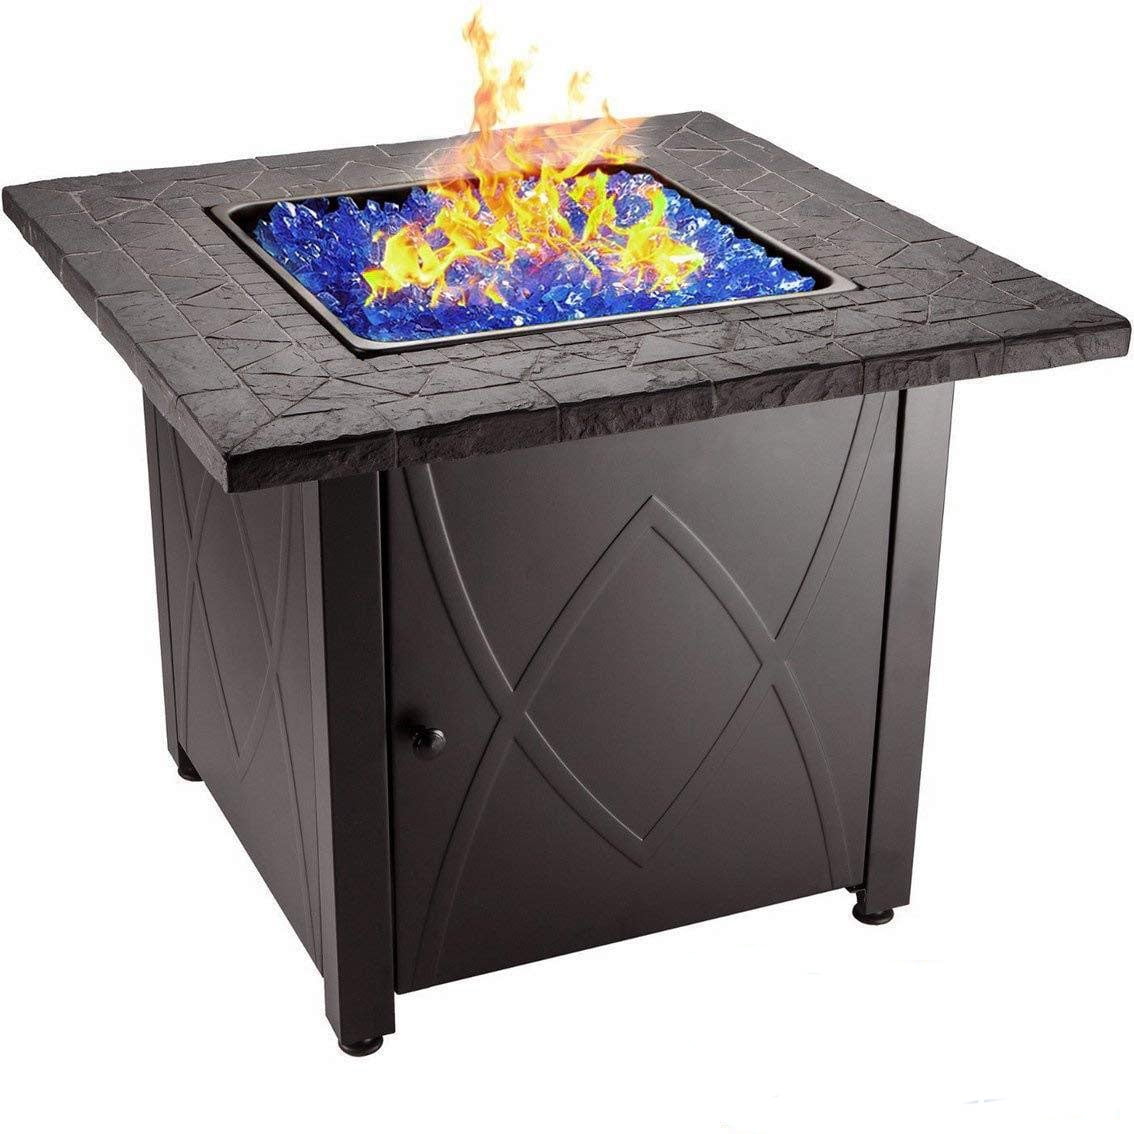 The Wakefield Lp Gas Outdoor Fire Pit With Concrete Resin Mantel Walmart Com